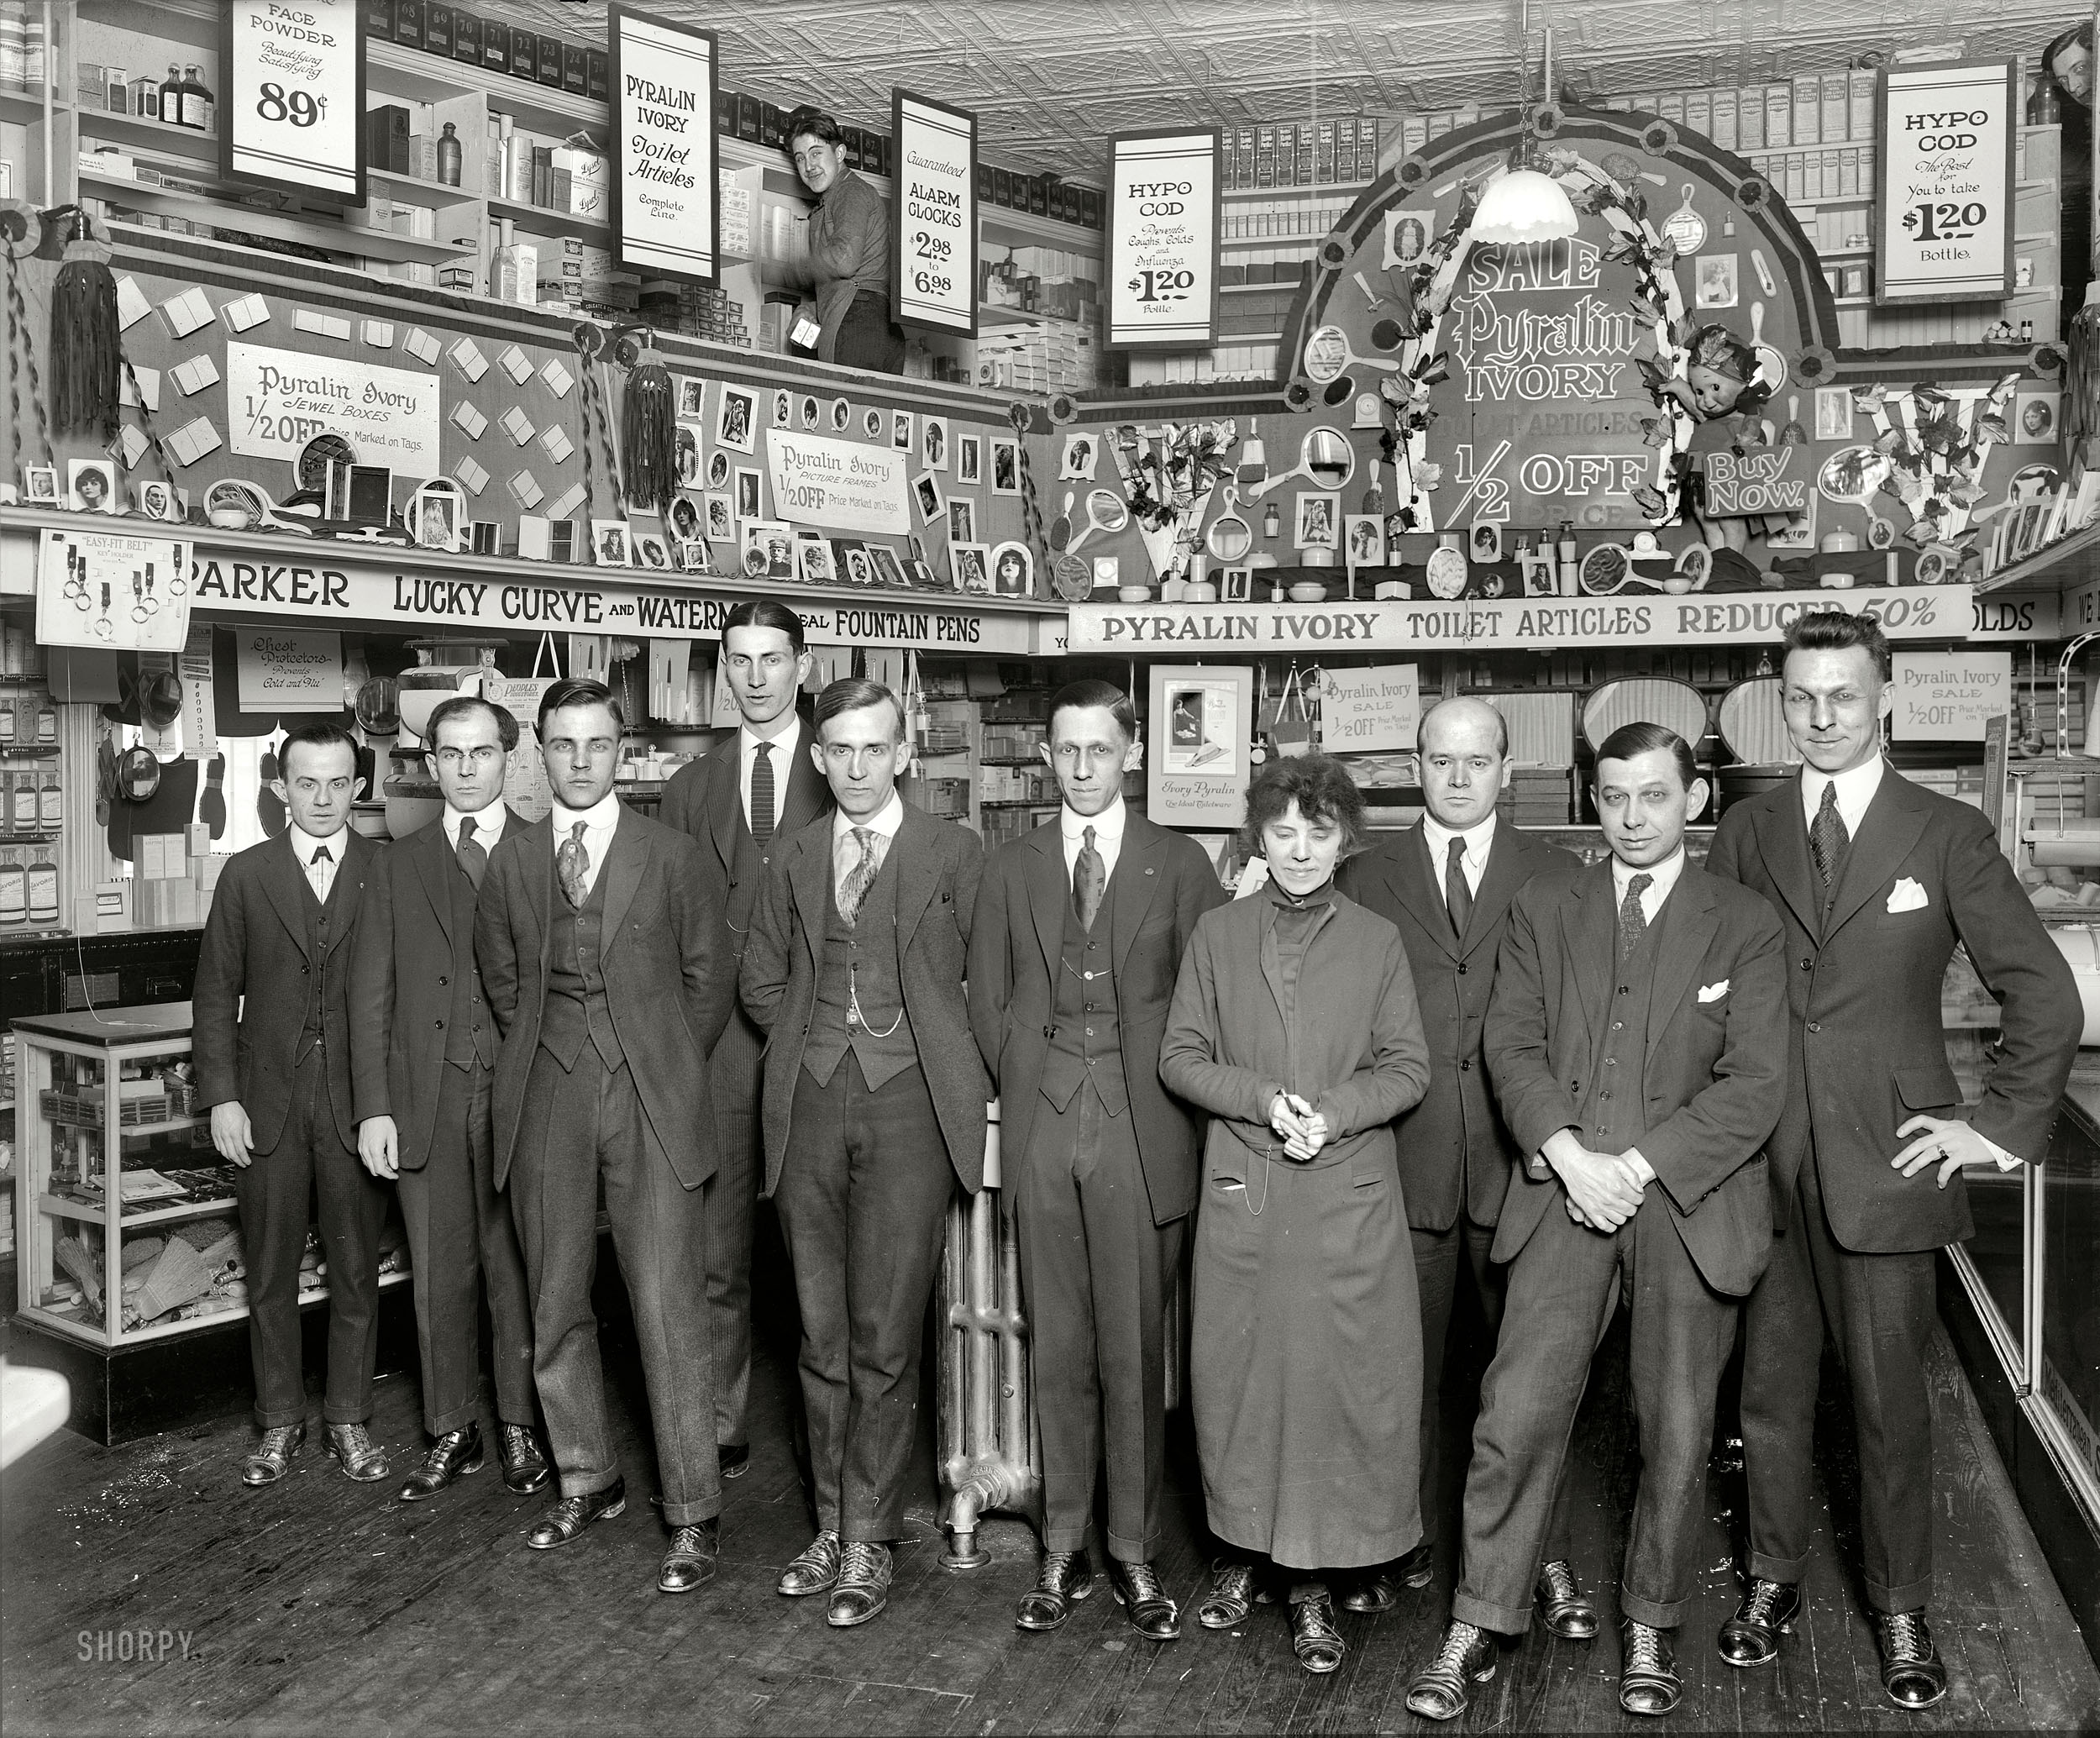 Washington, D.C., circa 1921. "People's Drug Store group, 7th and K Streets." The folks behind (and in front of) the vibrator display seen in this post. National Photo Company Collection glass negative. View full size.